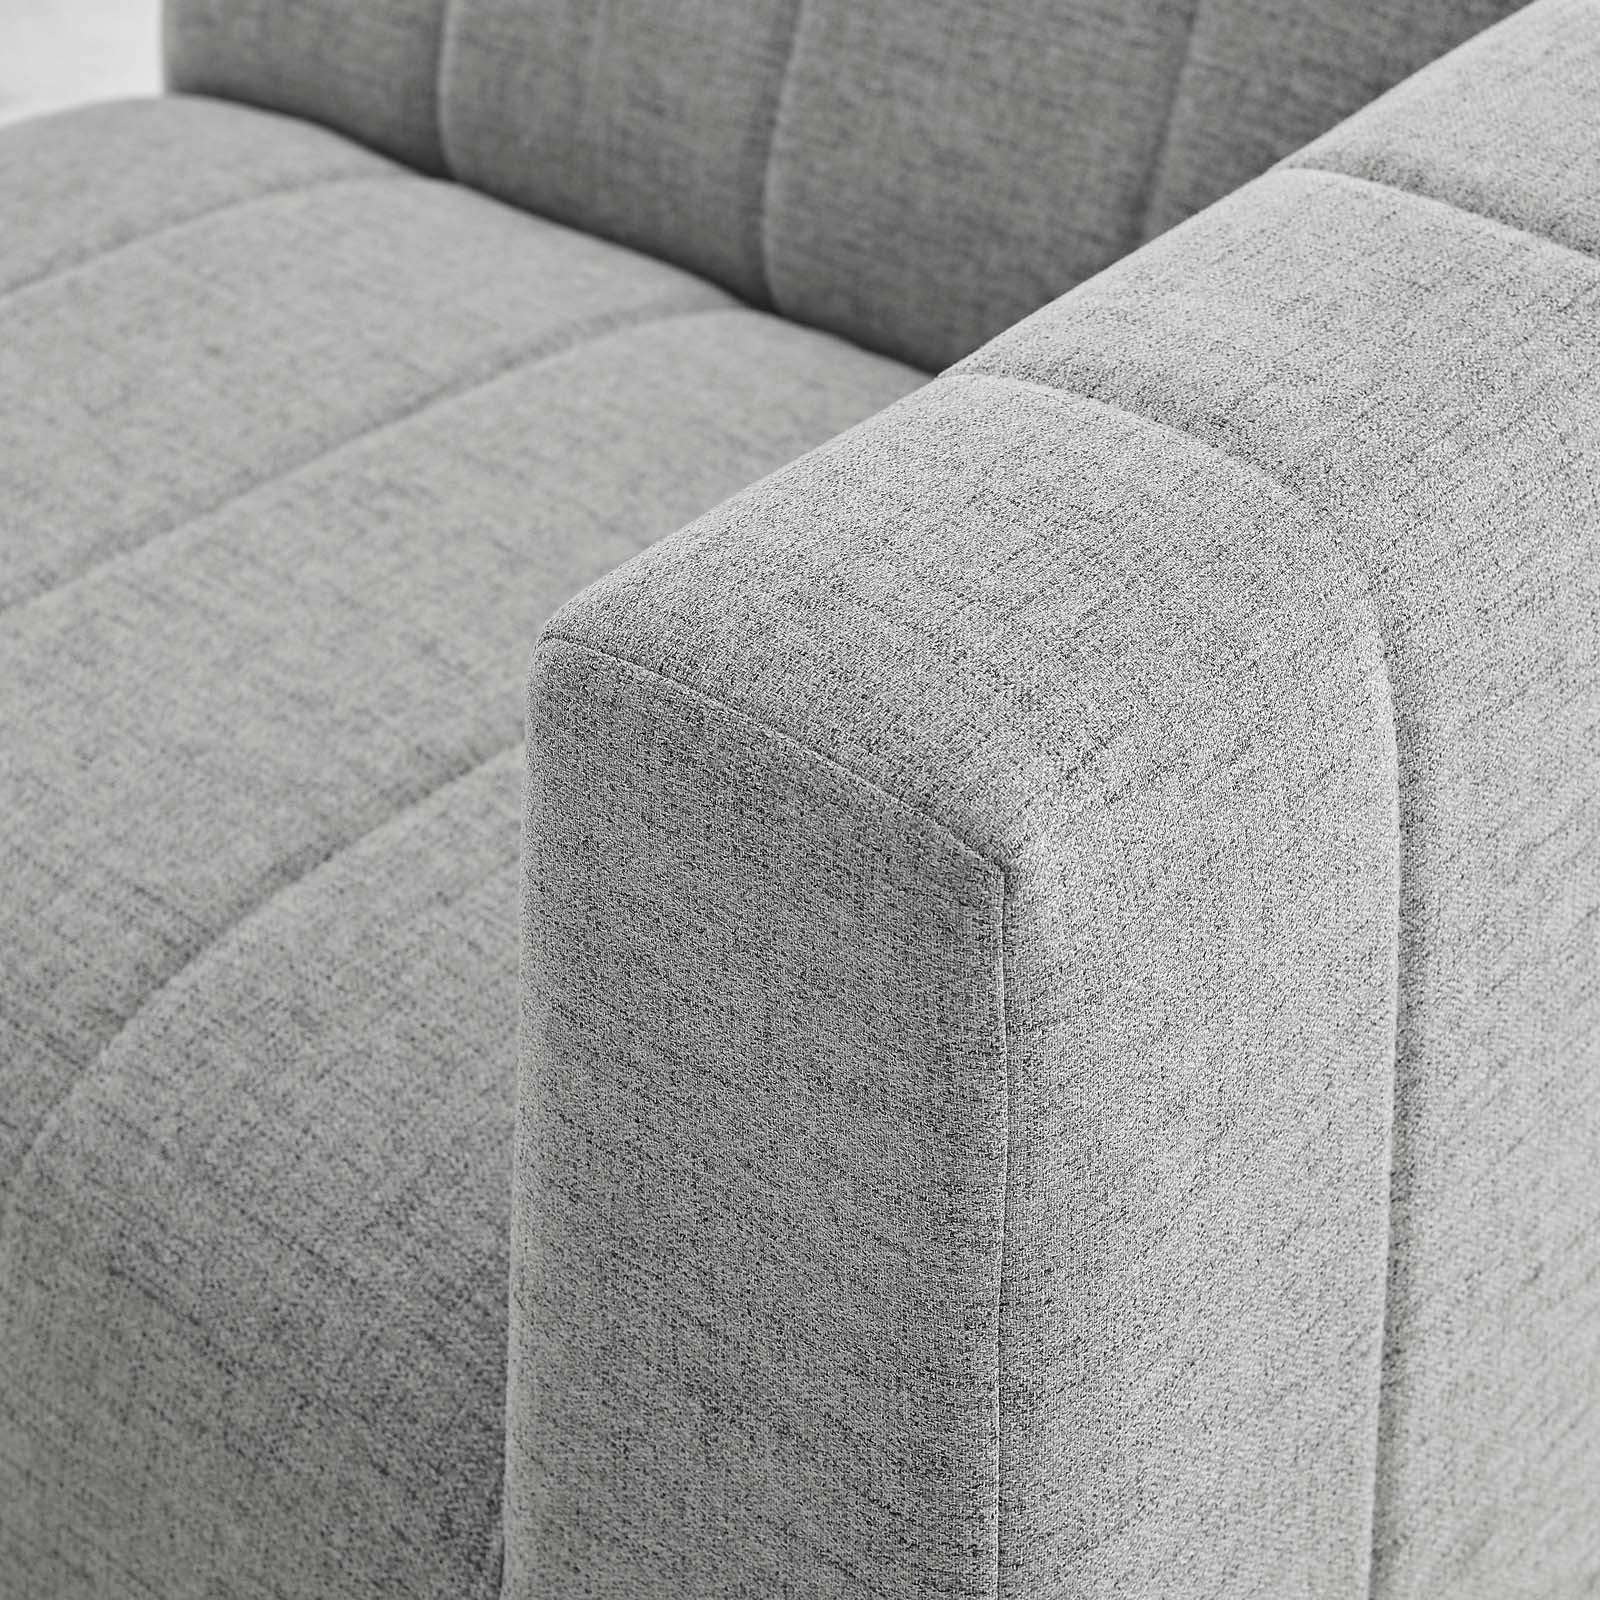 Bartlett Upholstered Fabric Upholstered Fabric 6-Piece Sectional Sofa - East Shore Modern Home Furnishings